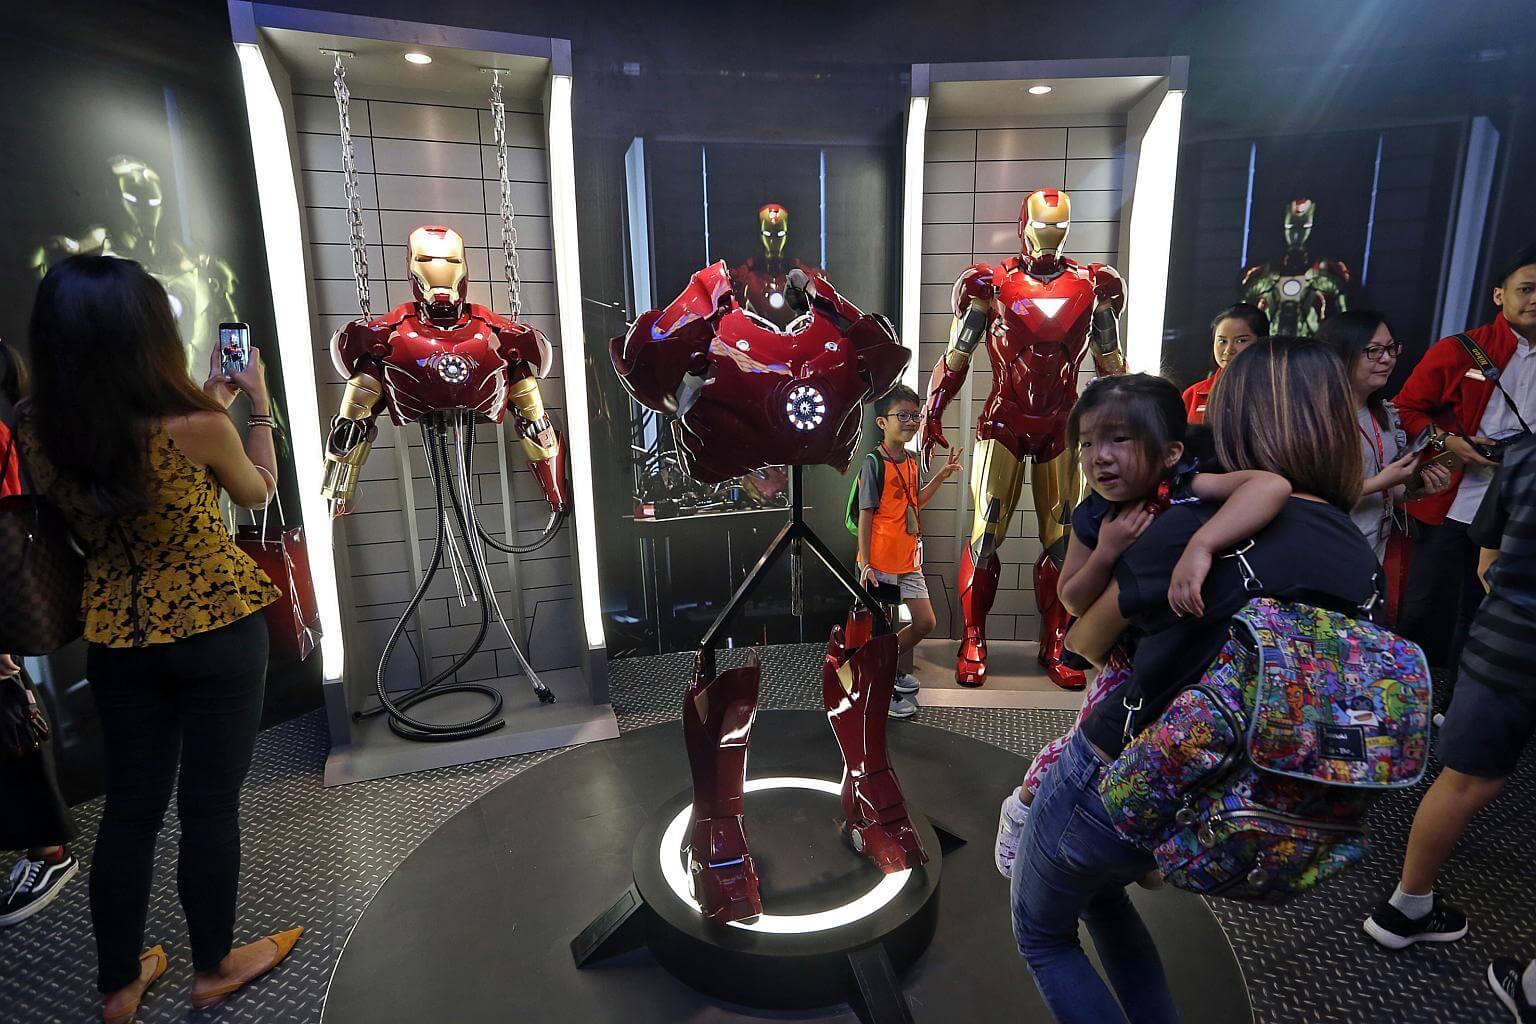 Enter the world of Marvel movies in the Madame Tussauds Singapore